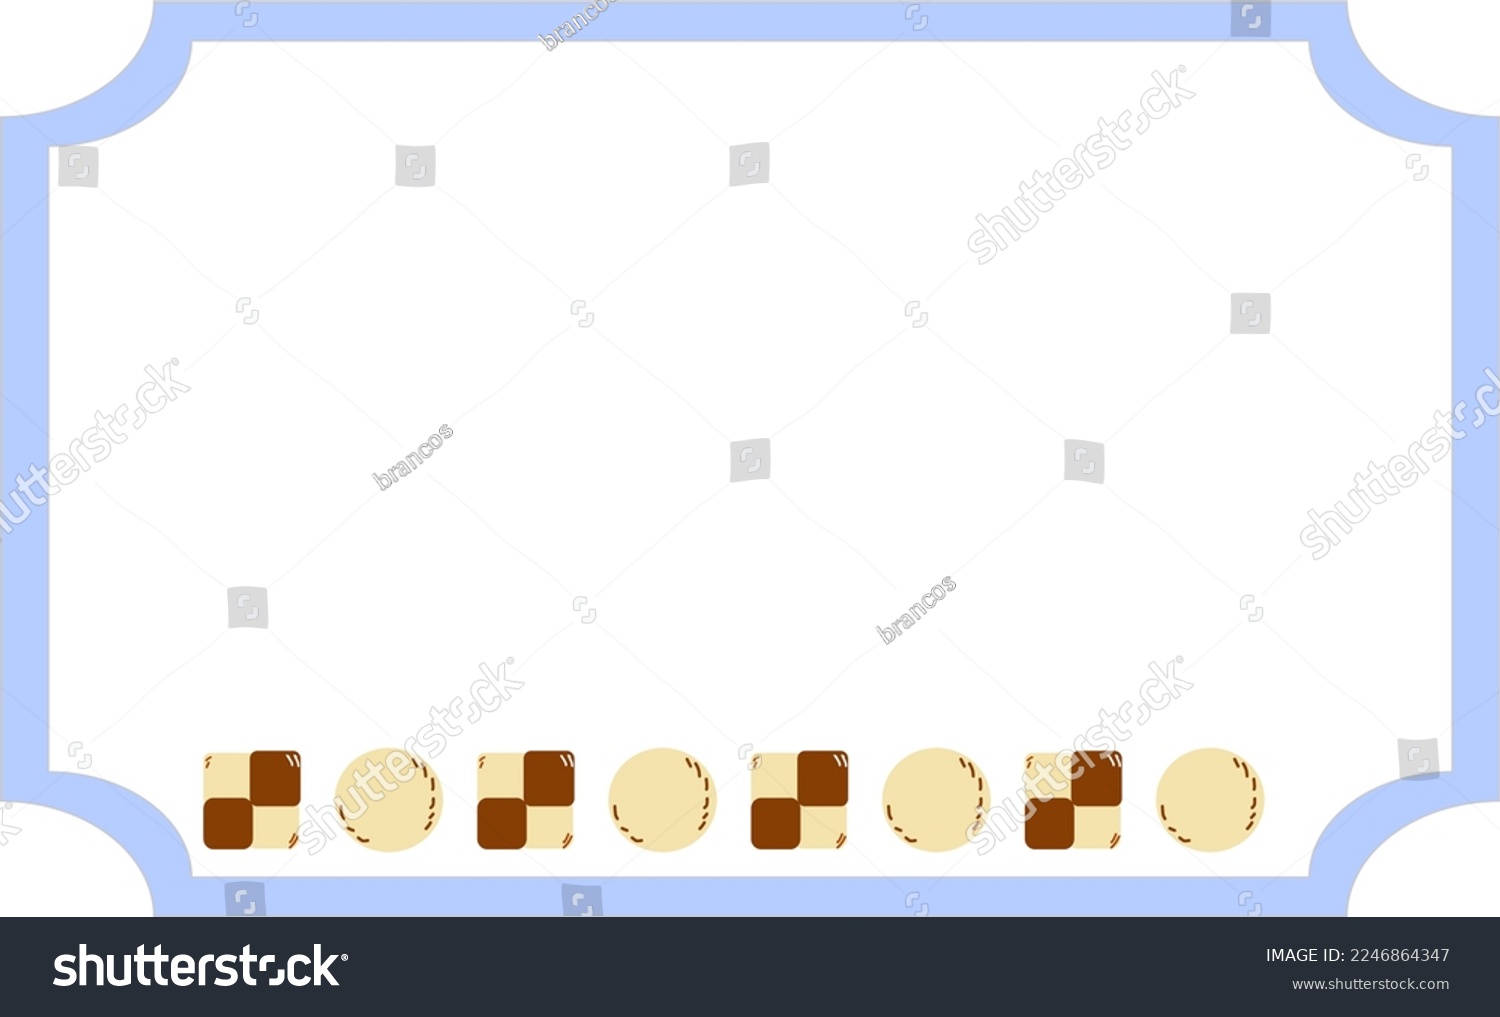 SVG of Icebox cookies and blue frame svg